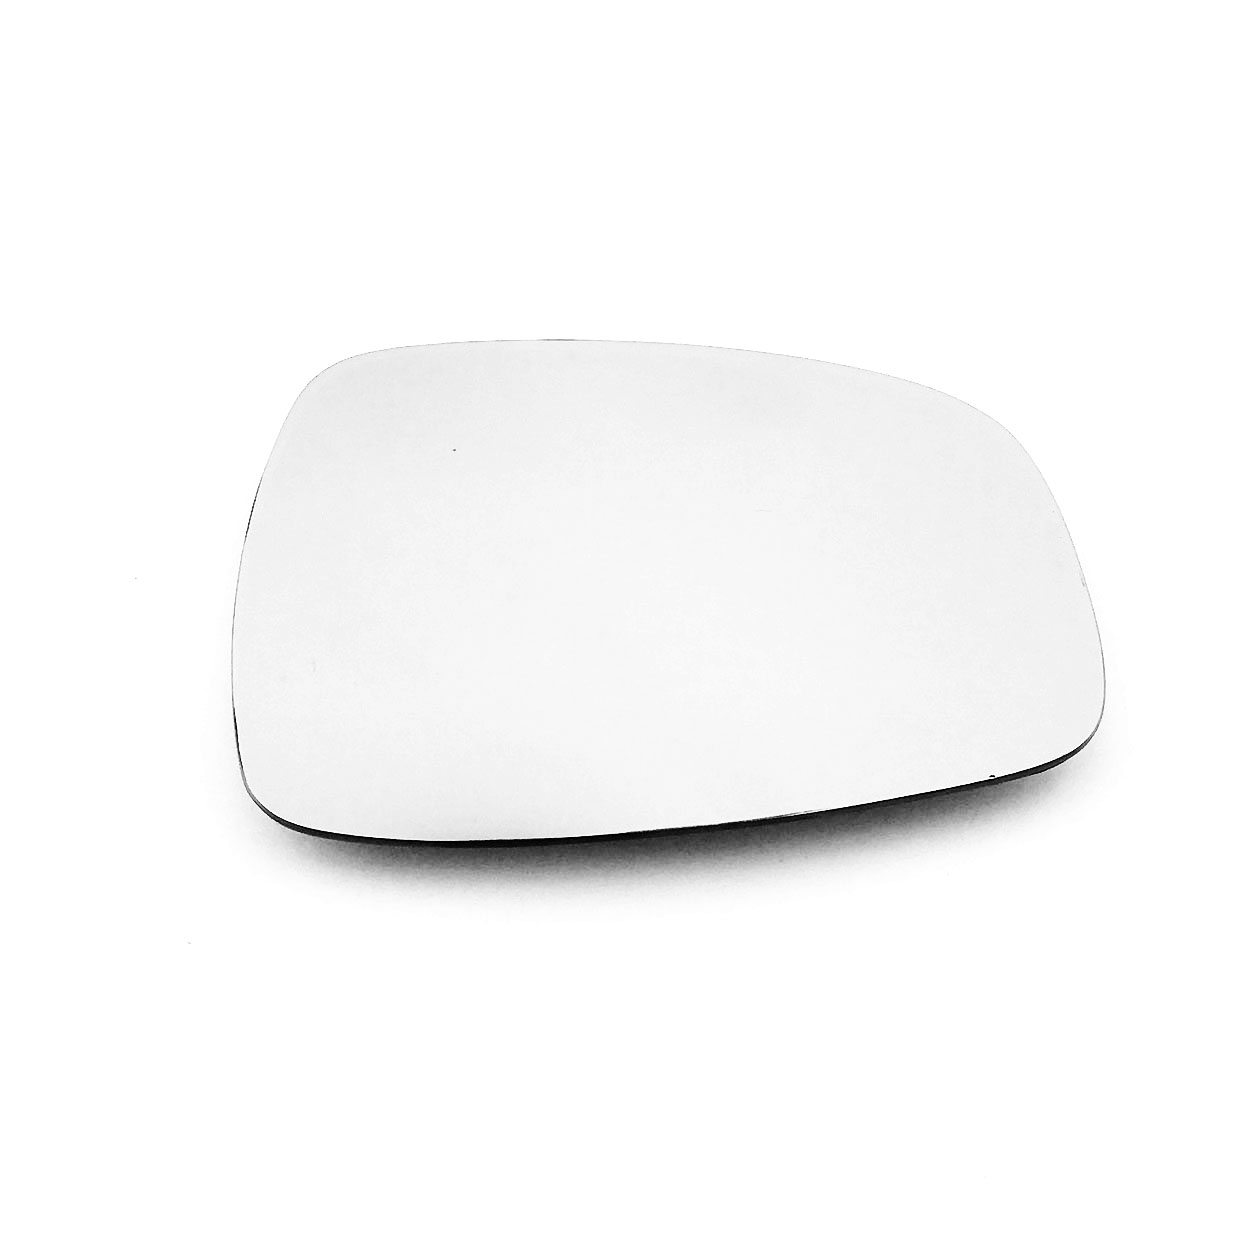 FIAT 500 X Wing Mirror Glass RIGHT HAND ( UK Driver Side ) 2015 to 2020 – Convex Wing Mirror